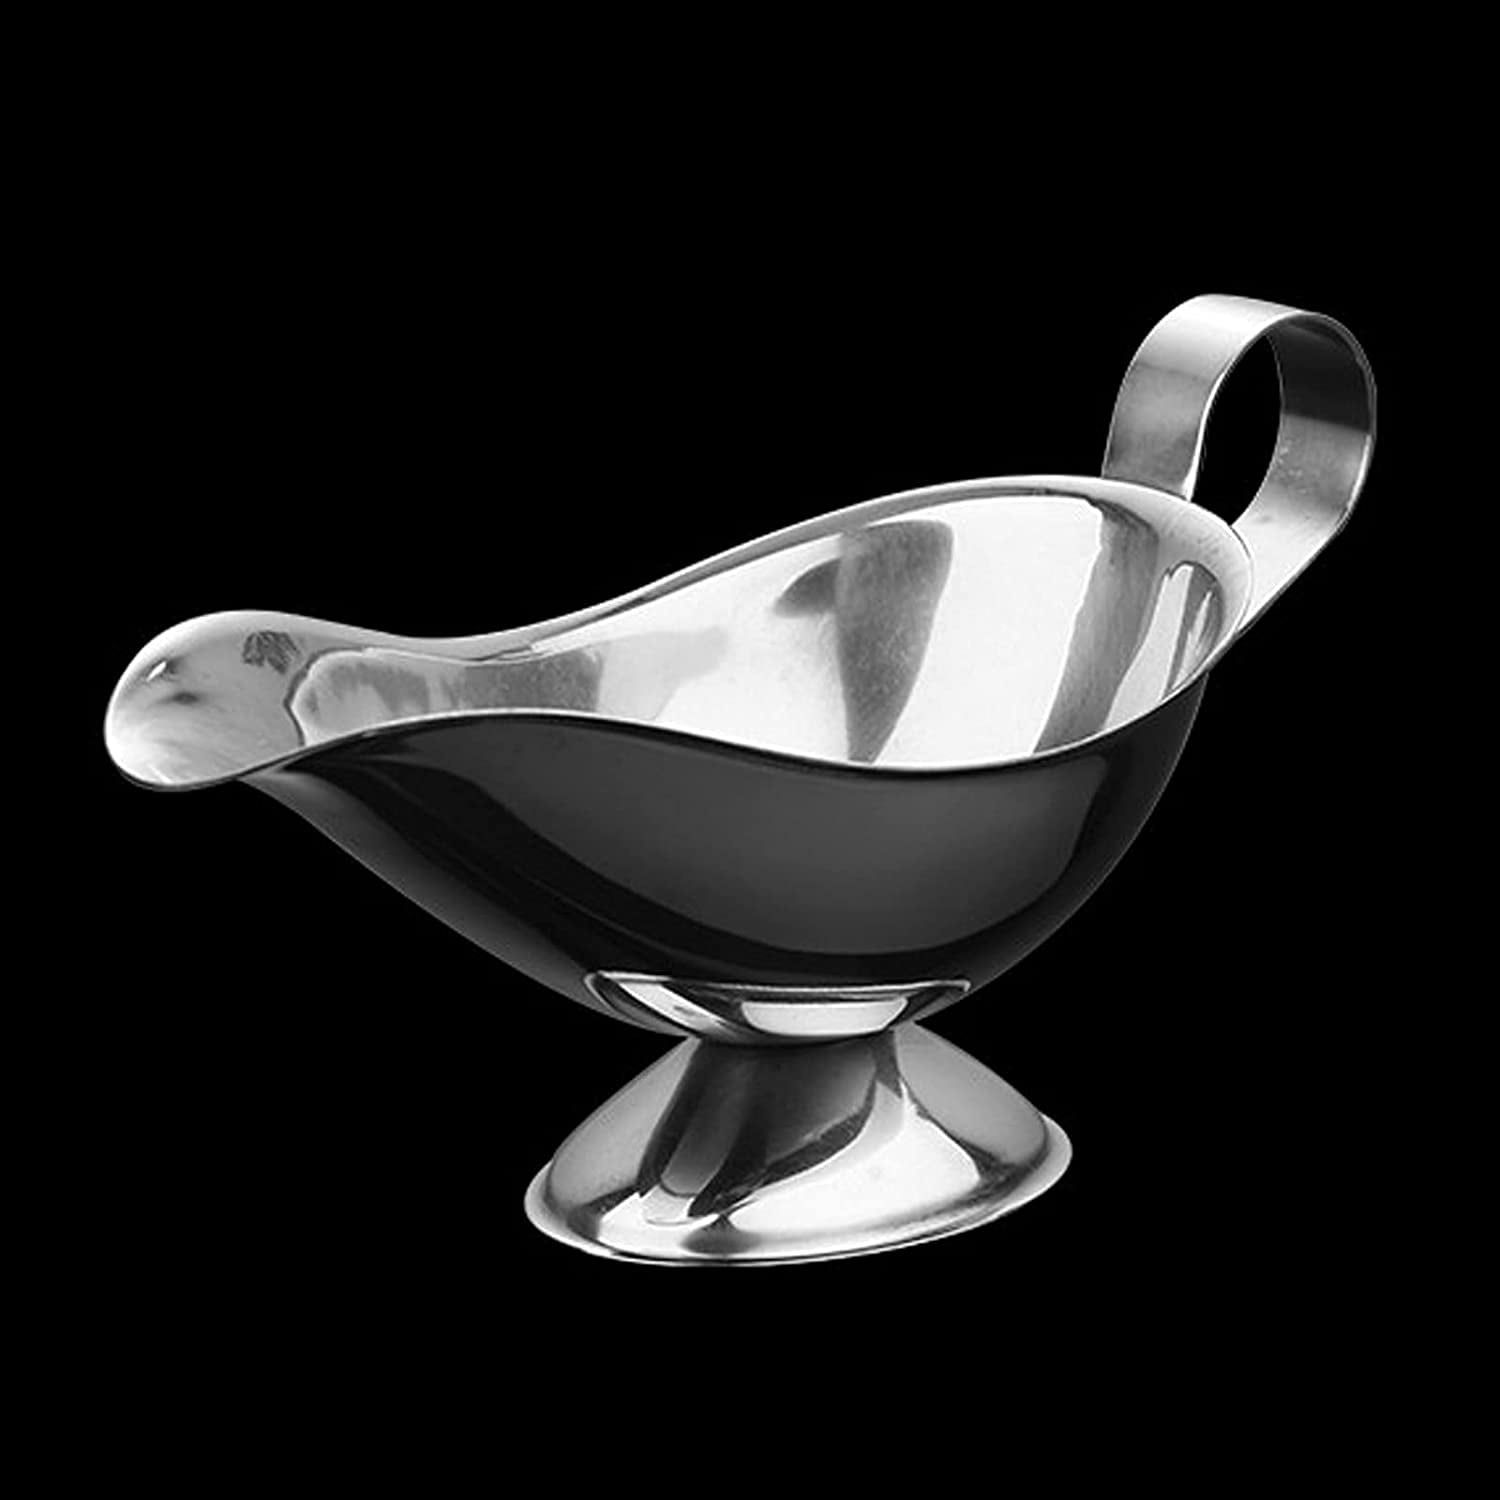 Durable Gravity Boat Sauce Tank Pitcher Gravy Boat Serving Pitcher Milk Creamer Pitcher Size : Small Cream Pitcher Duckbill-shaped Sauce Gate Design Is Made of Stainless Steel 